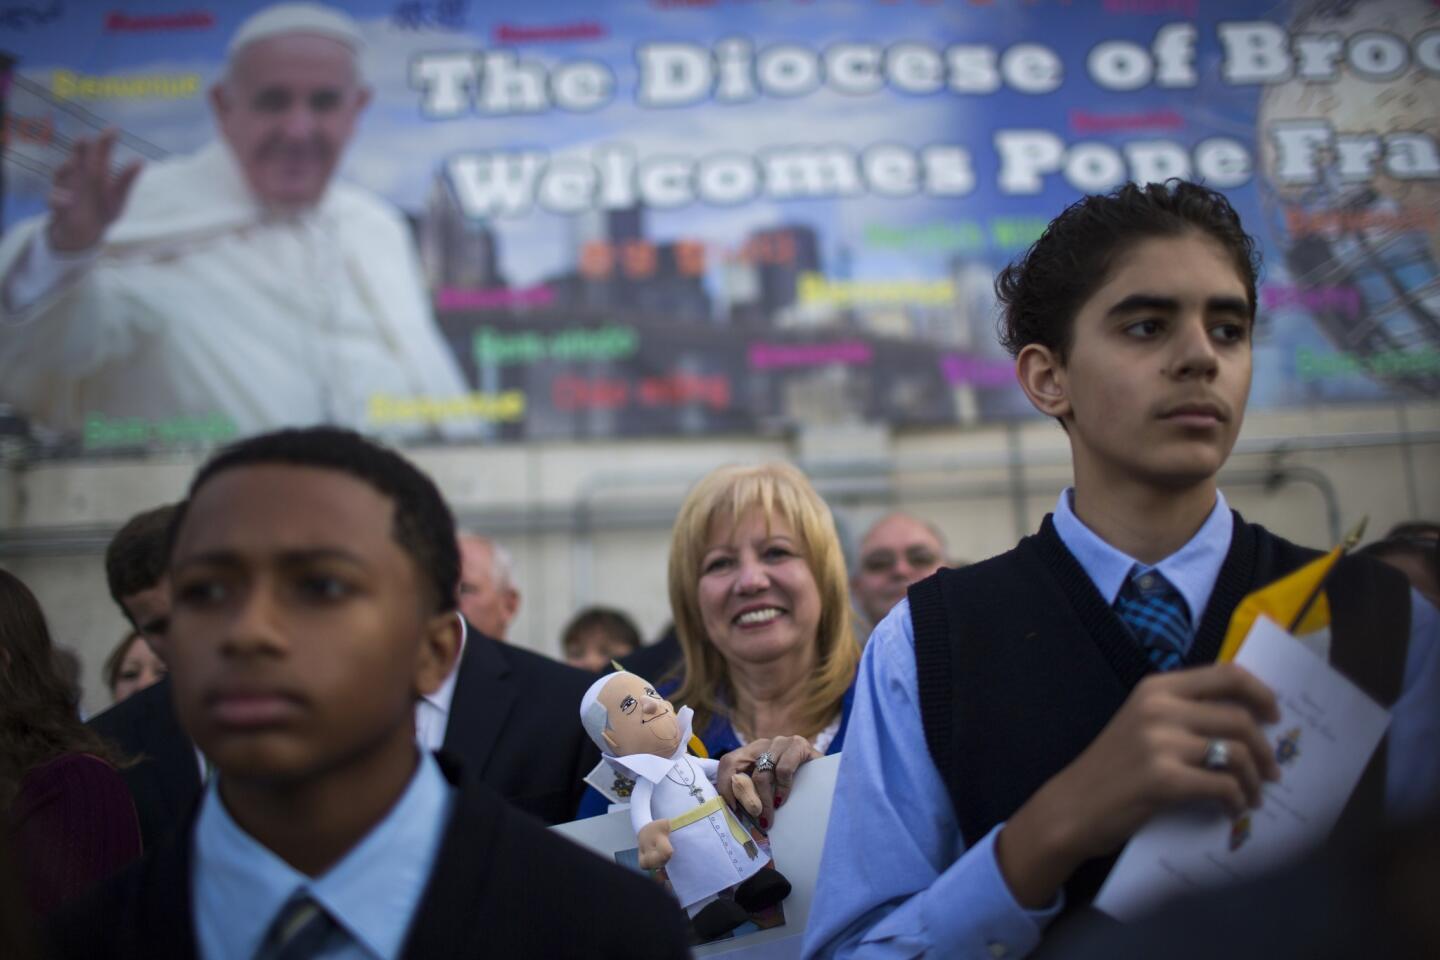 A woman holds a doll of Pope Francis while people attend the departure of the Pope from John F. Kennedy International Airport in New York Sept. 26, 2015.